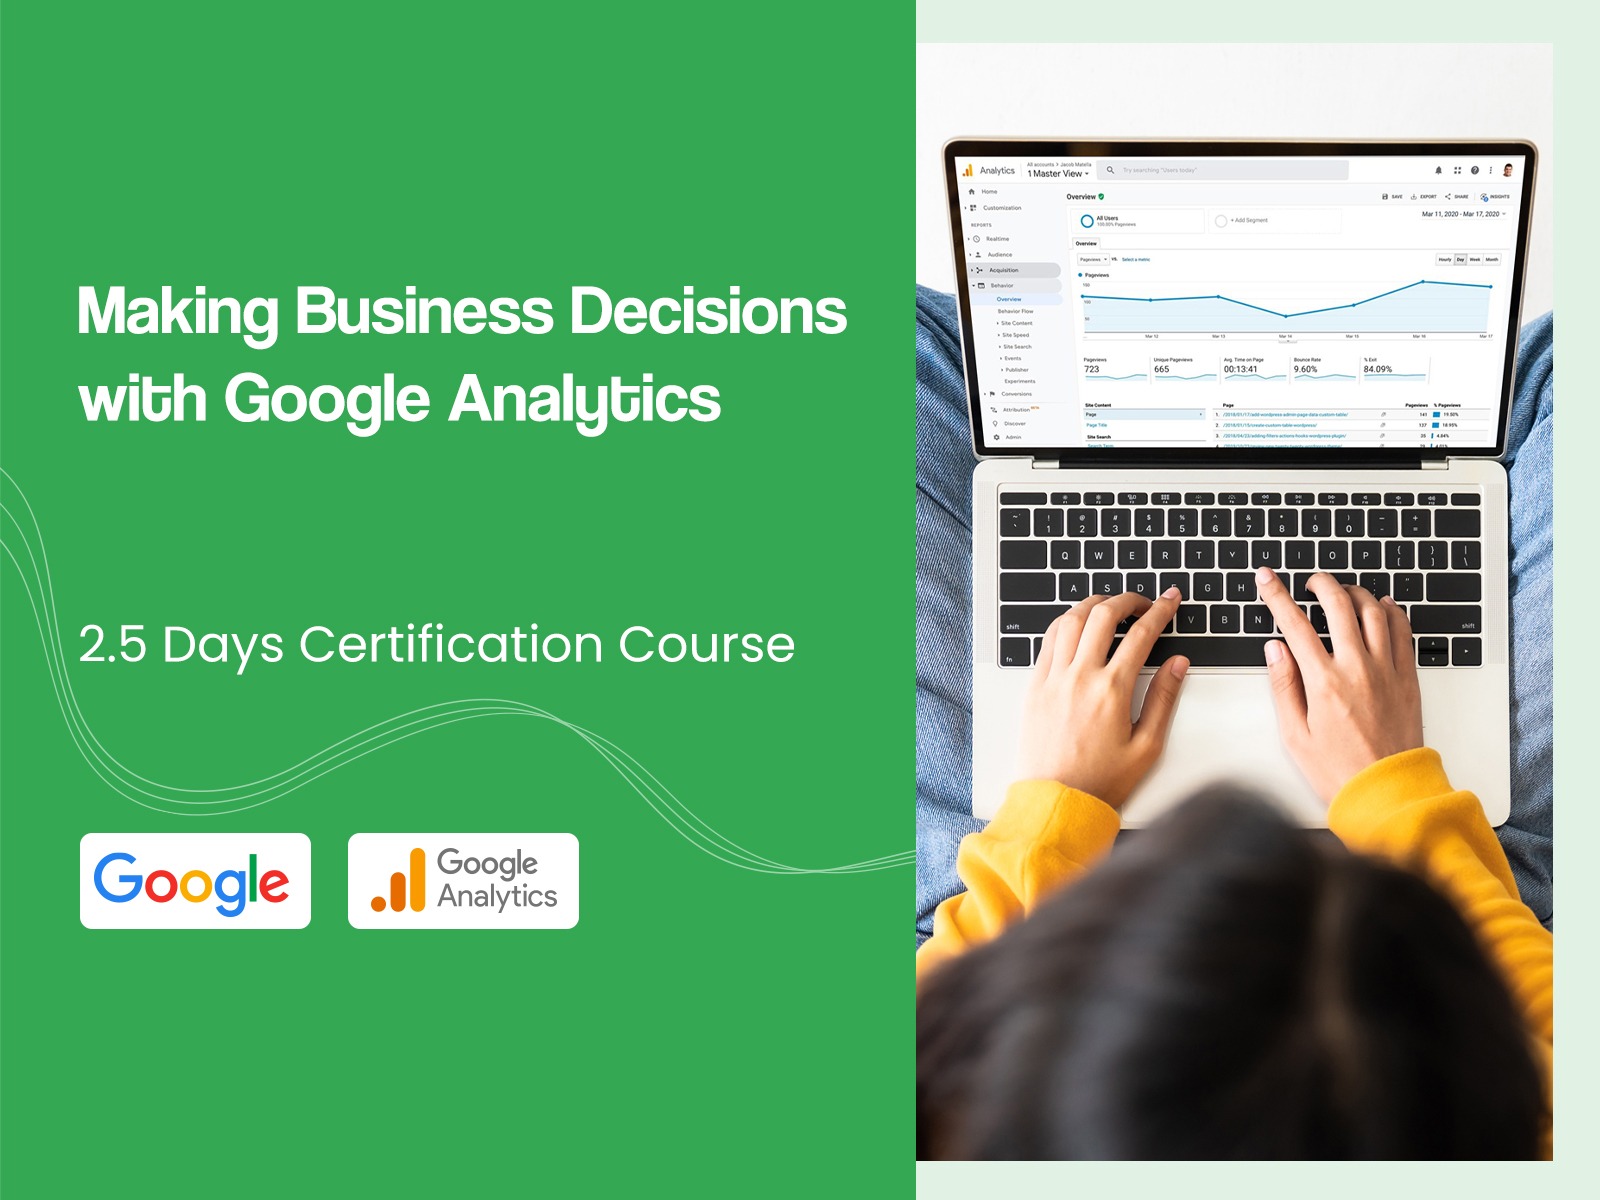 Making Business Decisions with Google Analytics